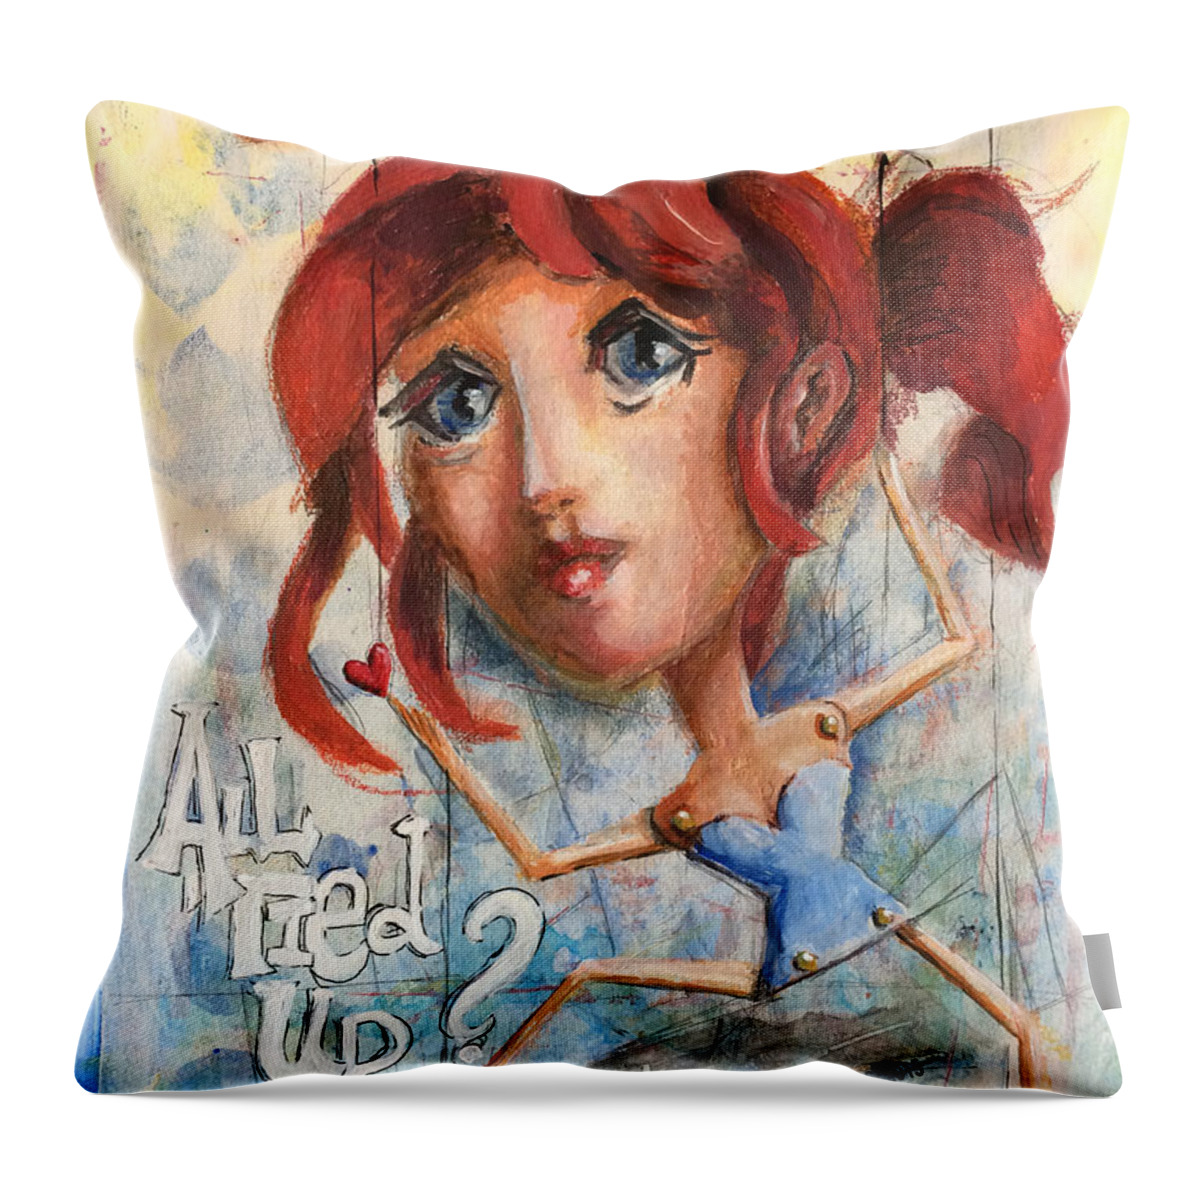 Redhead Throw Pillow featuring the painting All Tied Up by Vicki Ross